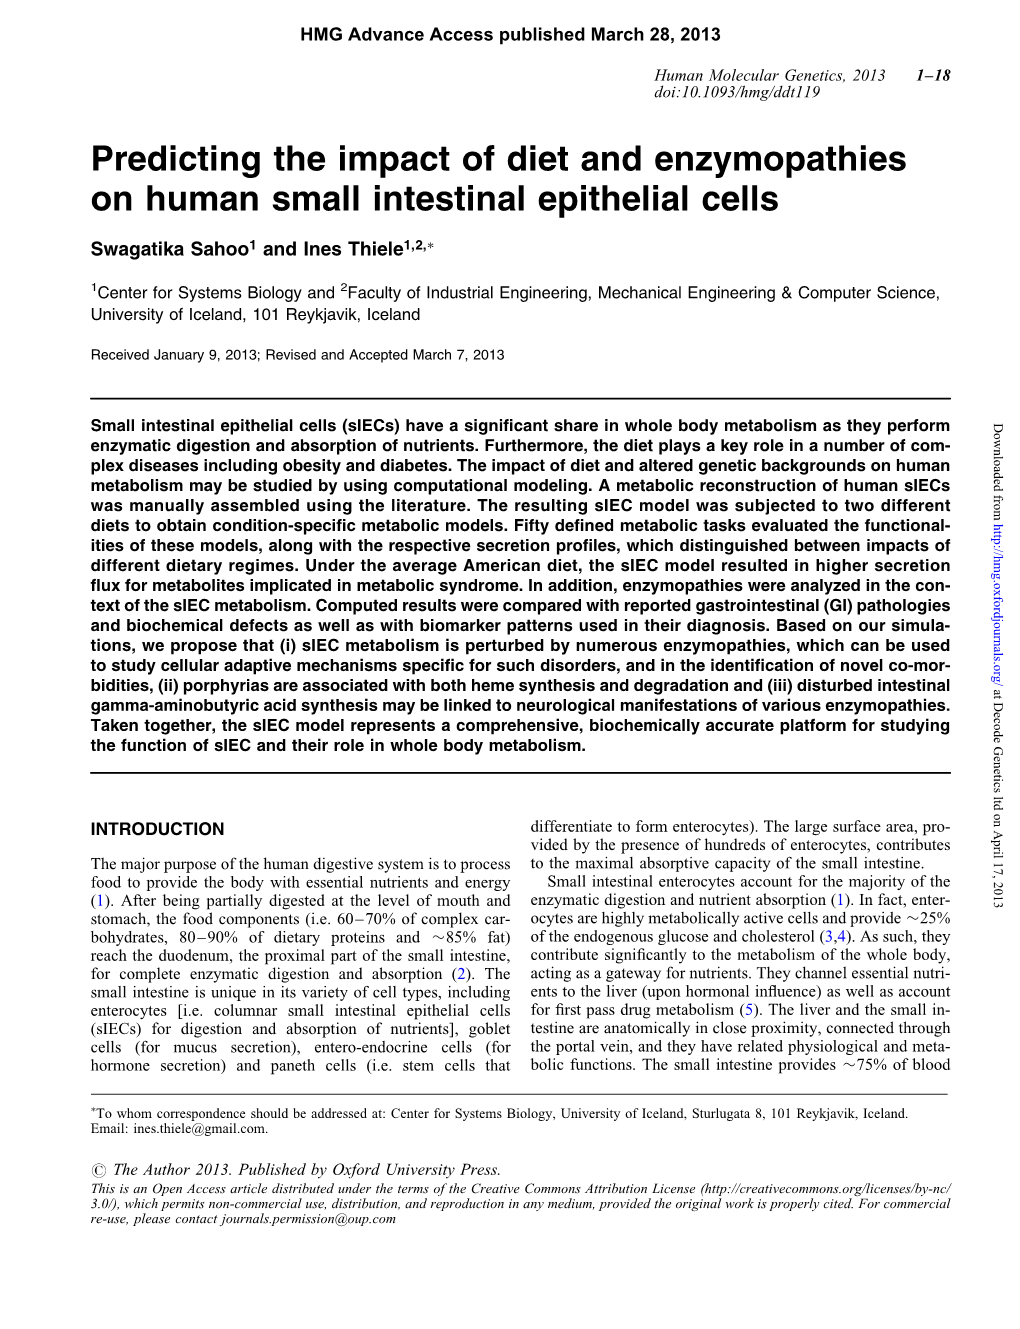 Predicting the Impact of Diet and Enzymopathies on Human Small Intestinal Epithelial Cells